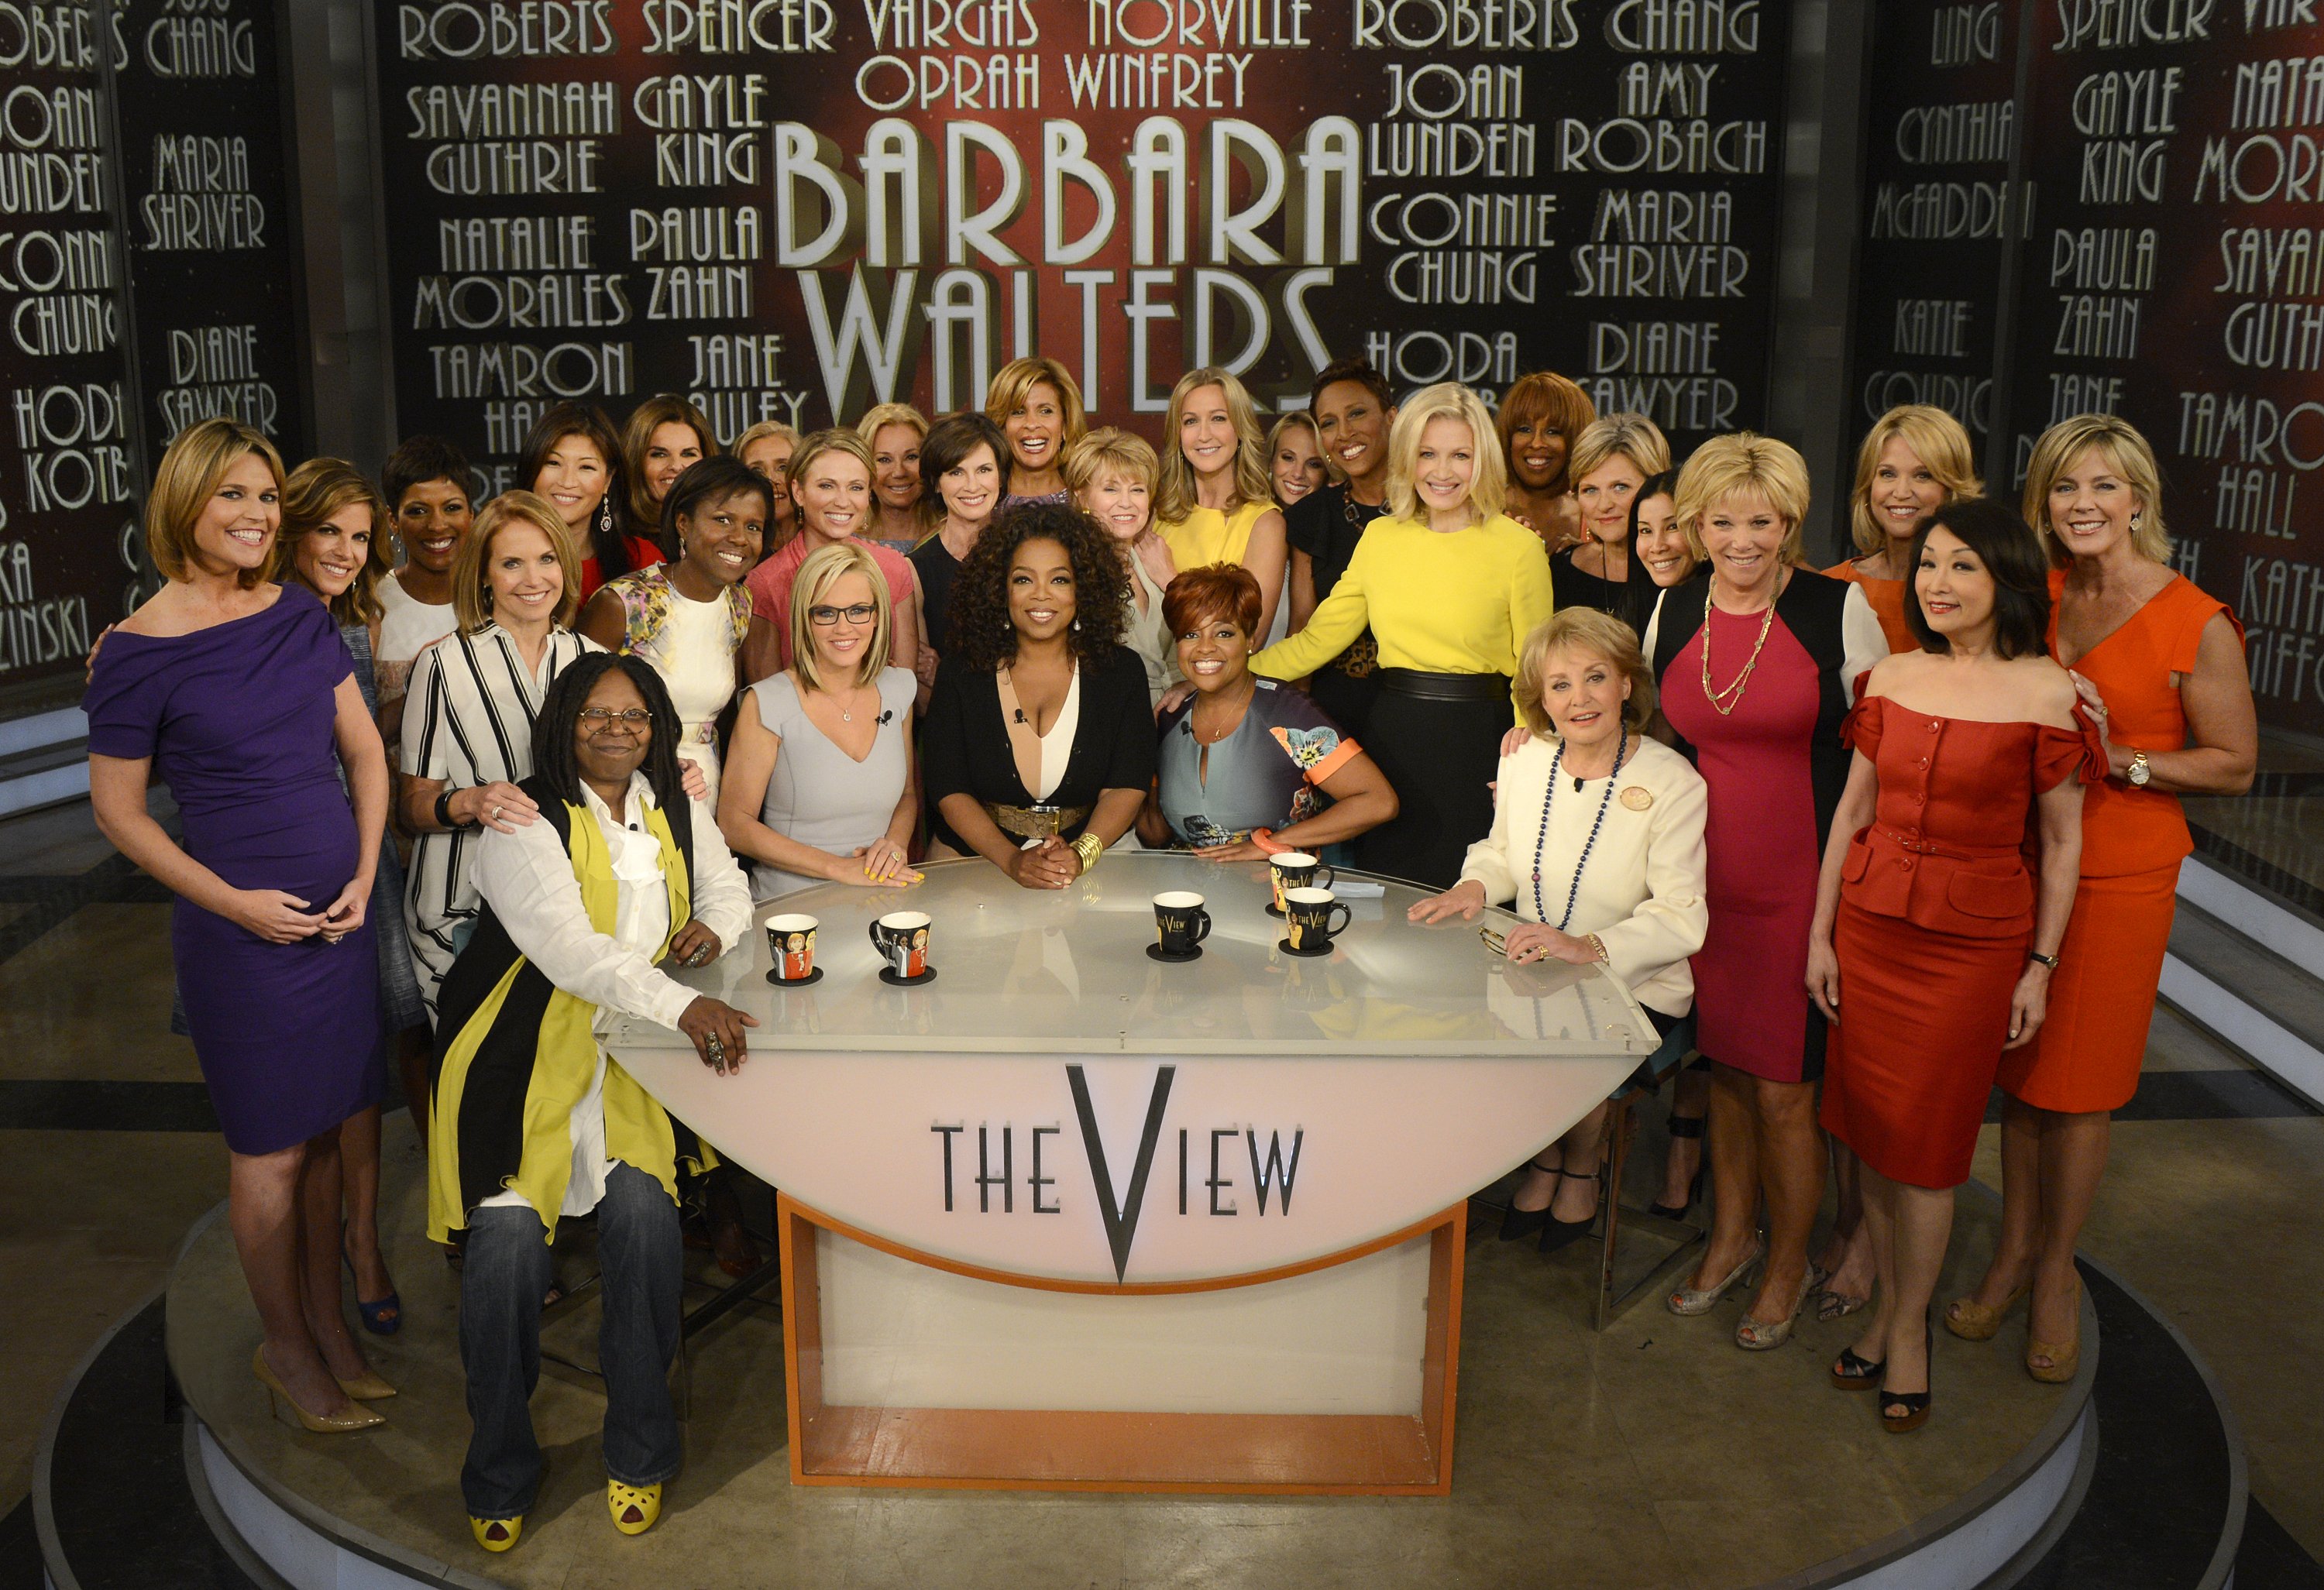 Barbara Walters says goodbye to daily television with her final co-host appearance on "The View," airing Friday, May 16  | Source: Getty Images